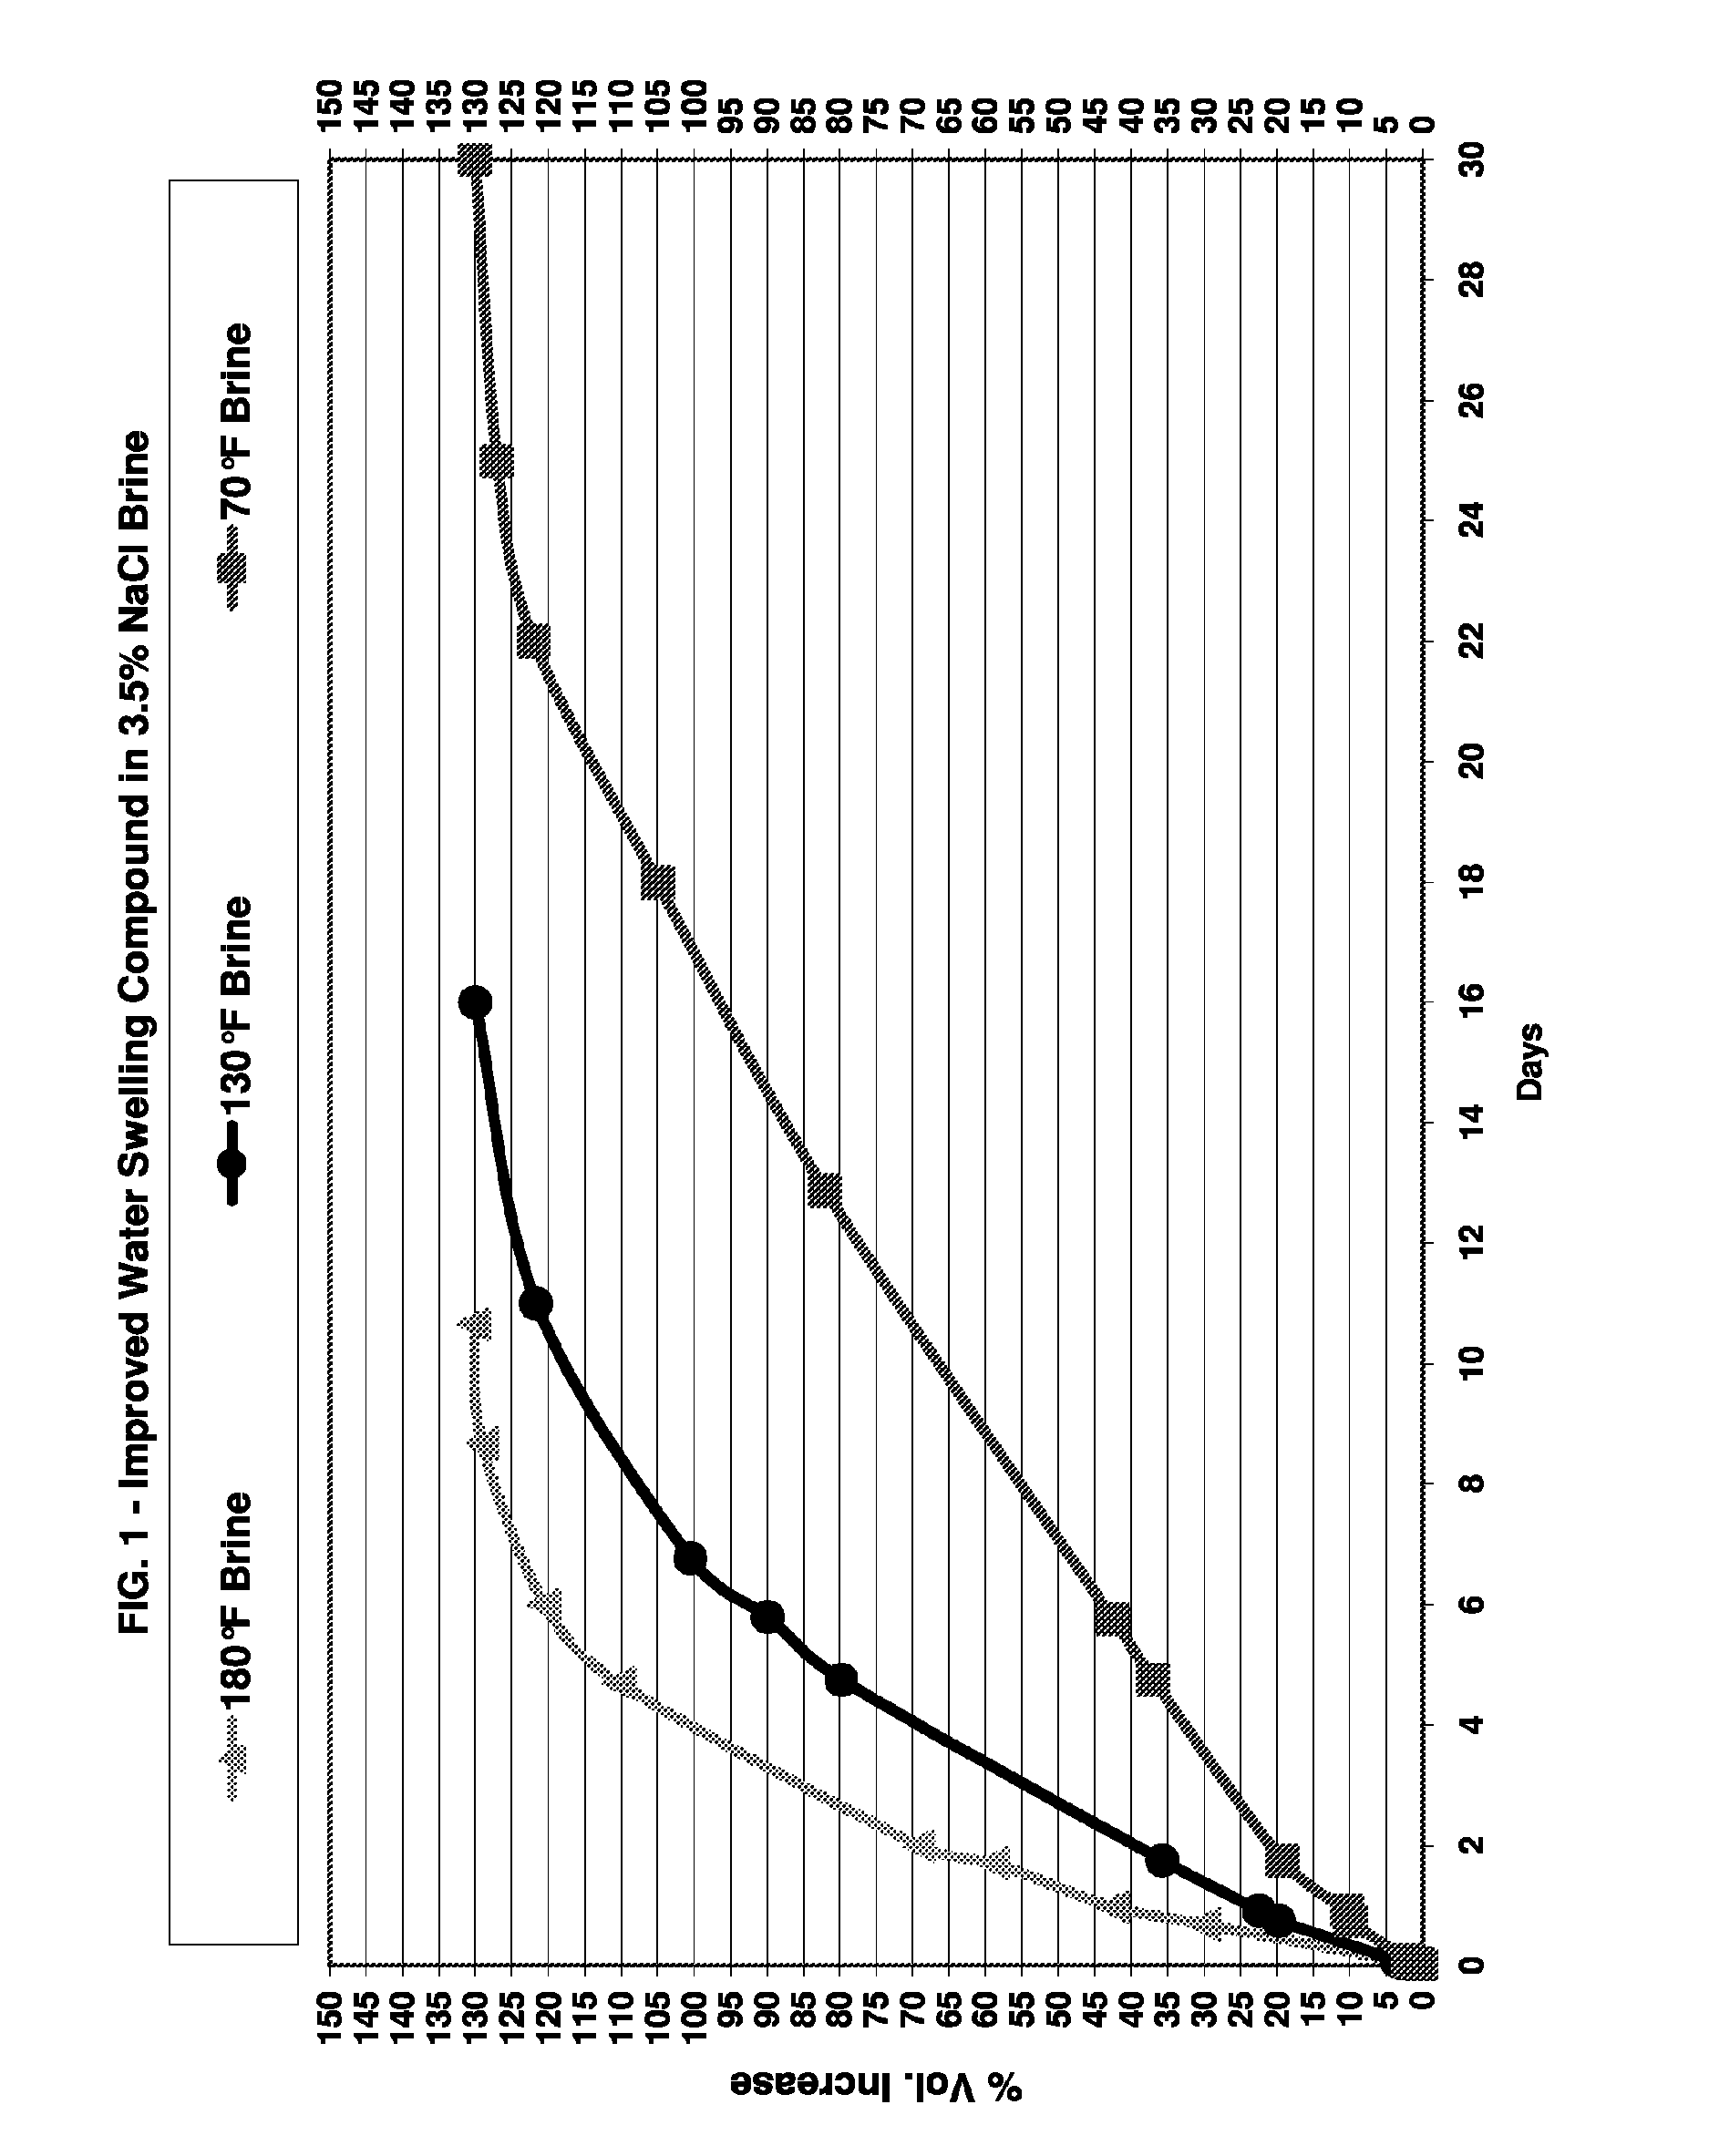 Water swelling rubber compound for use in reactive packers and other downhole tools